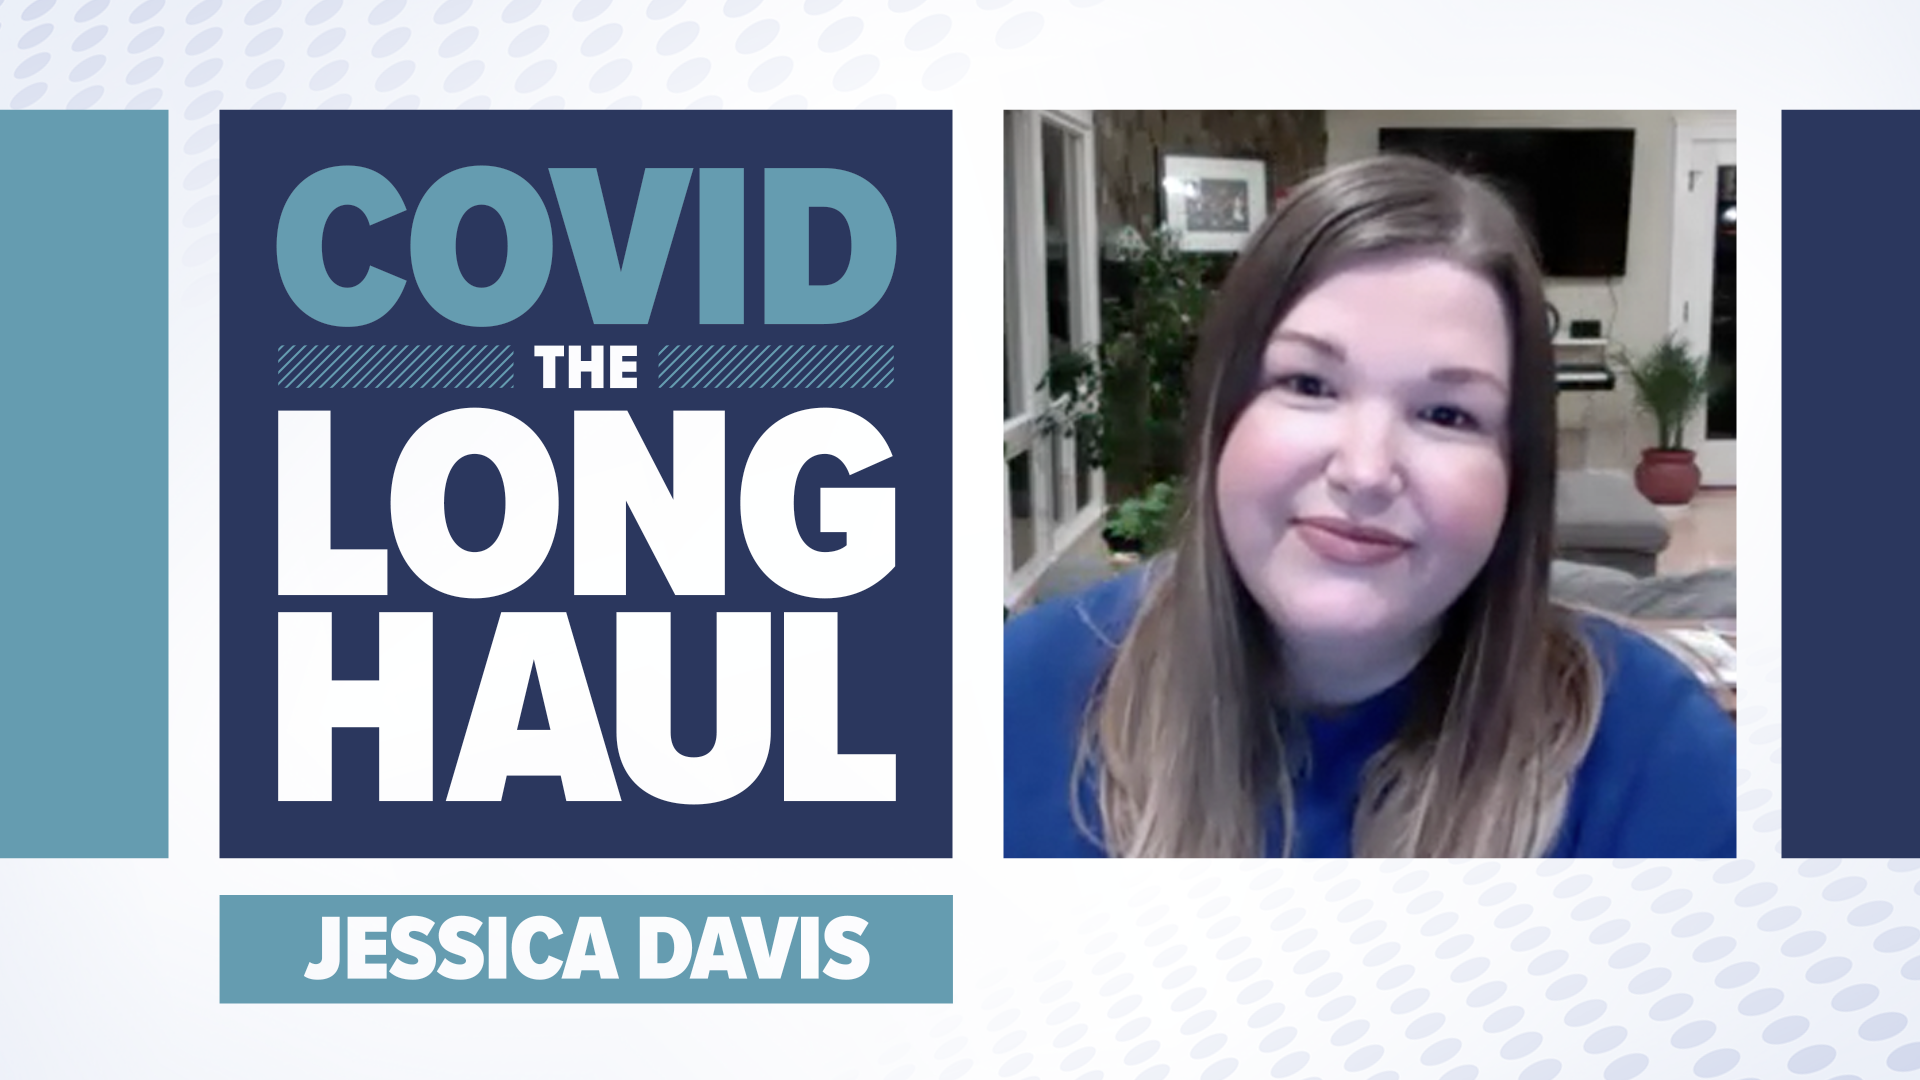 Jessica Davis says her doctors believe she still has a post-viral syndrome now, after first getting sick in March.